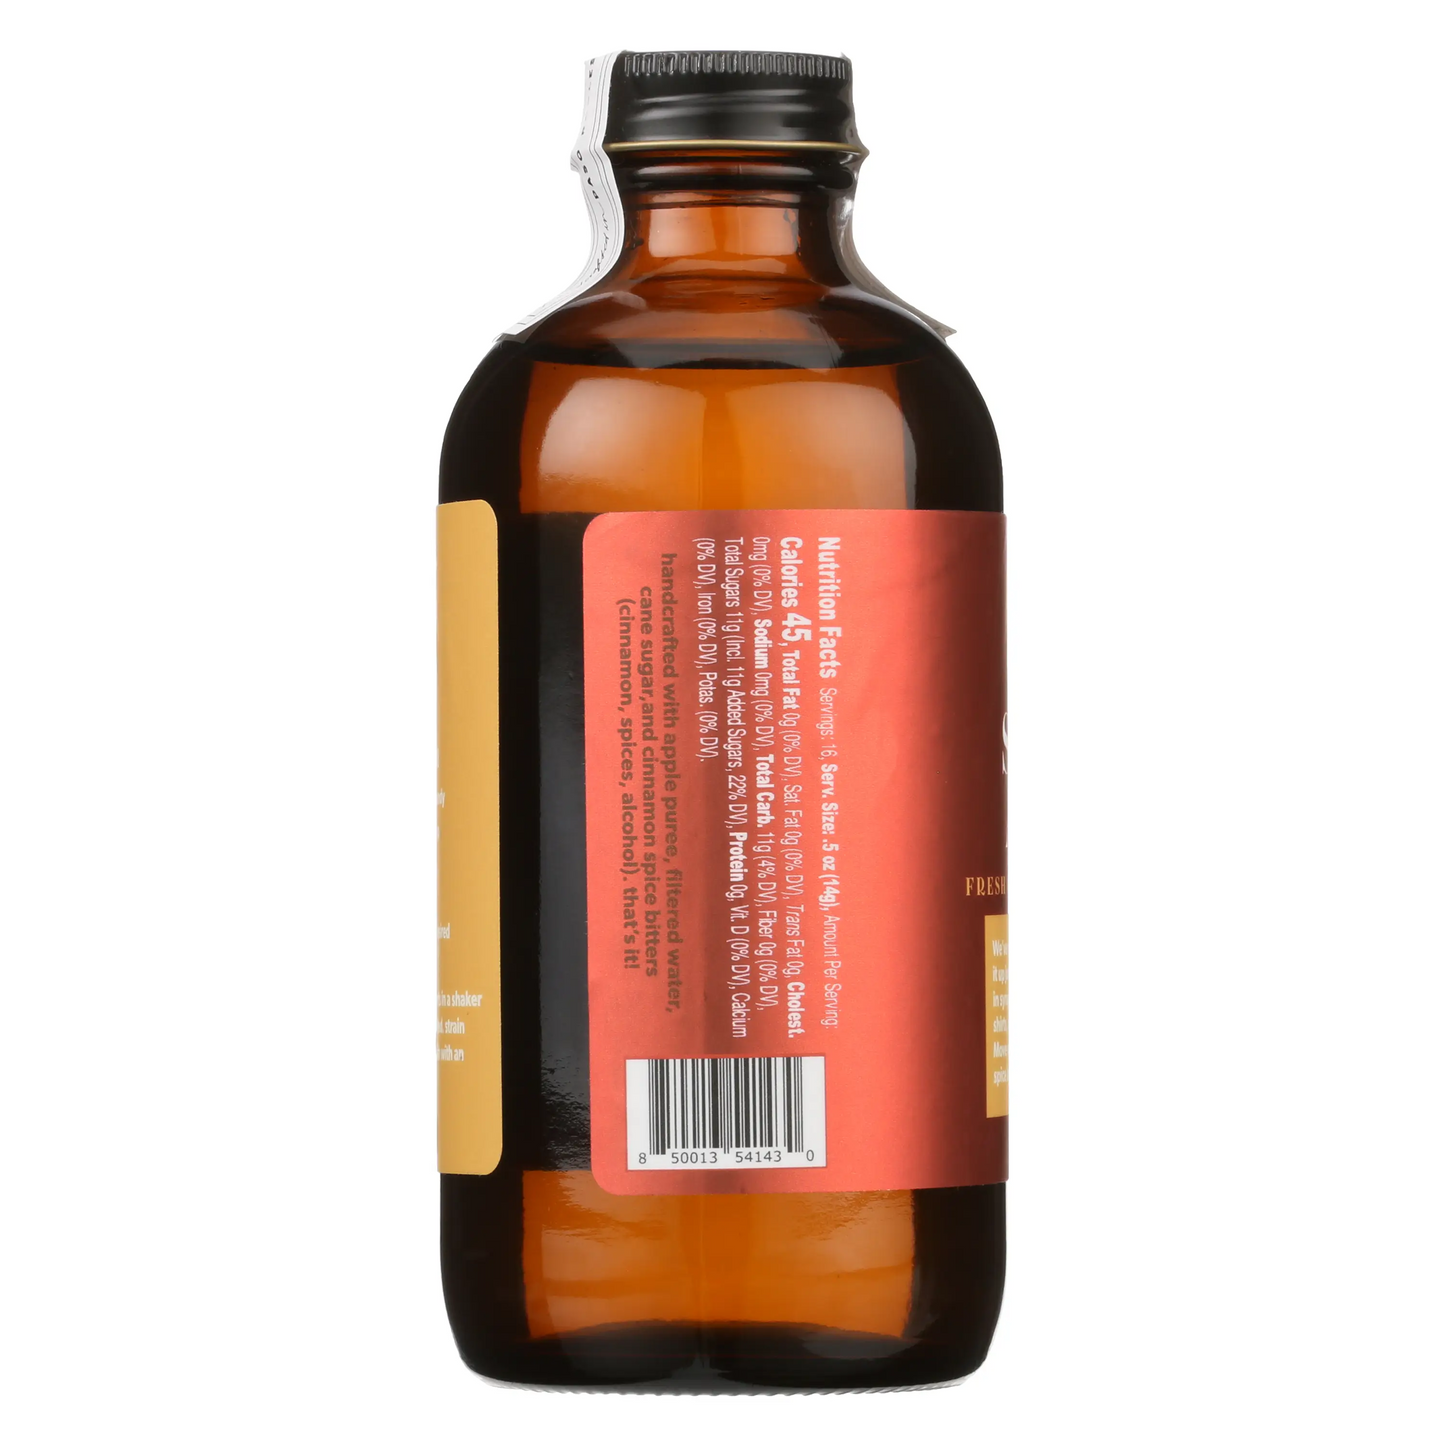 Yes Cocktail Co Spiced Apple Syrup (8 oz)